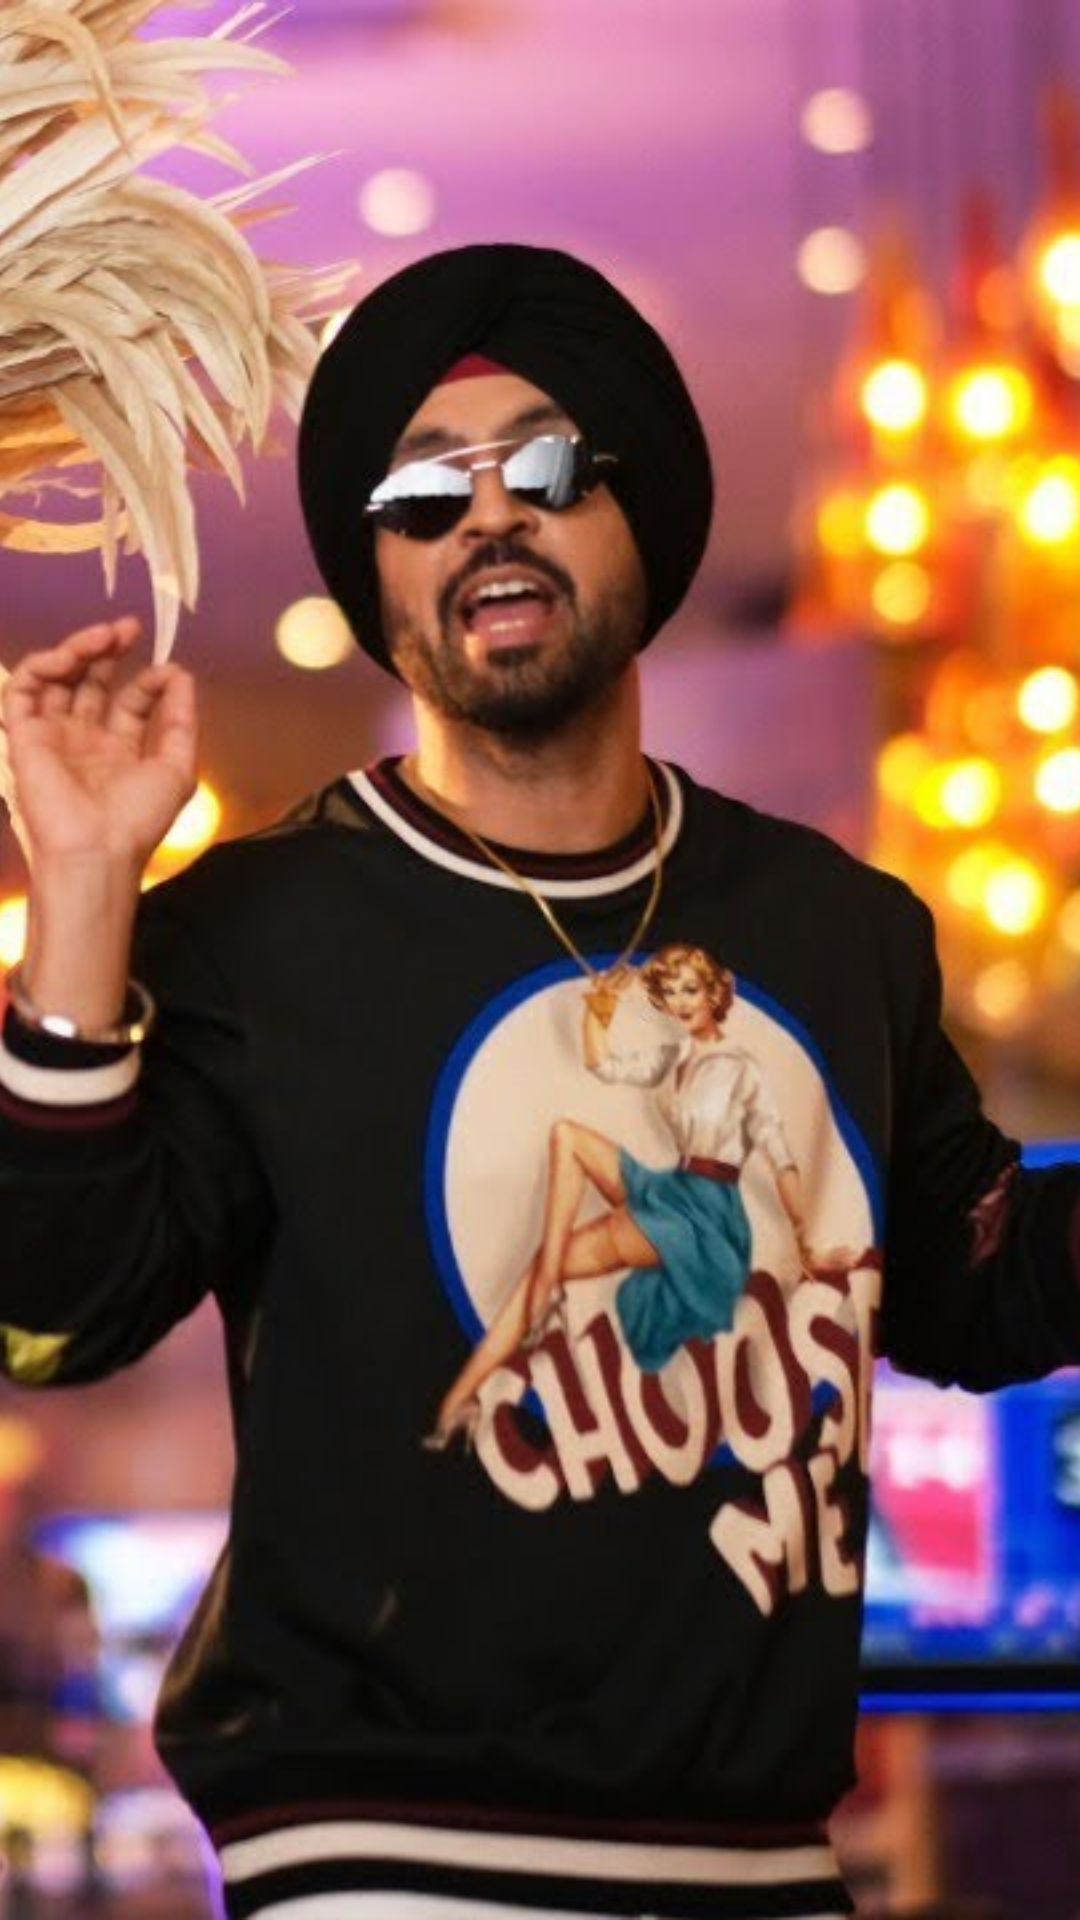 Diljit Dosanjh: Born To Shine (Official Music Video) G.O.A.T 